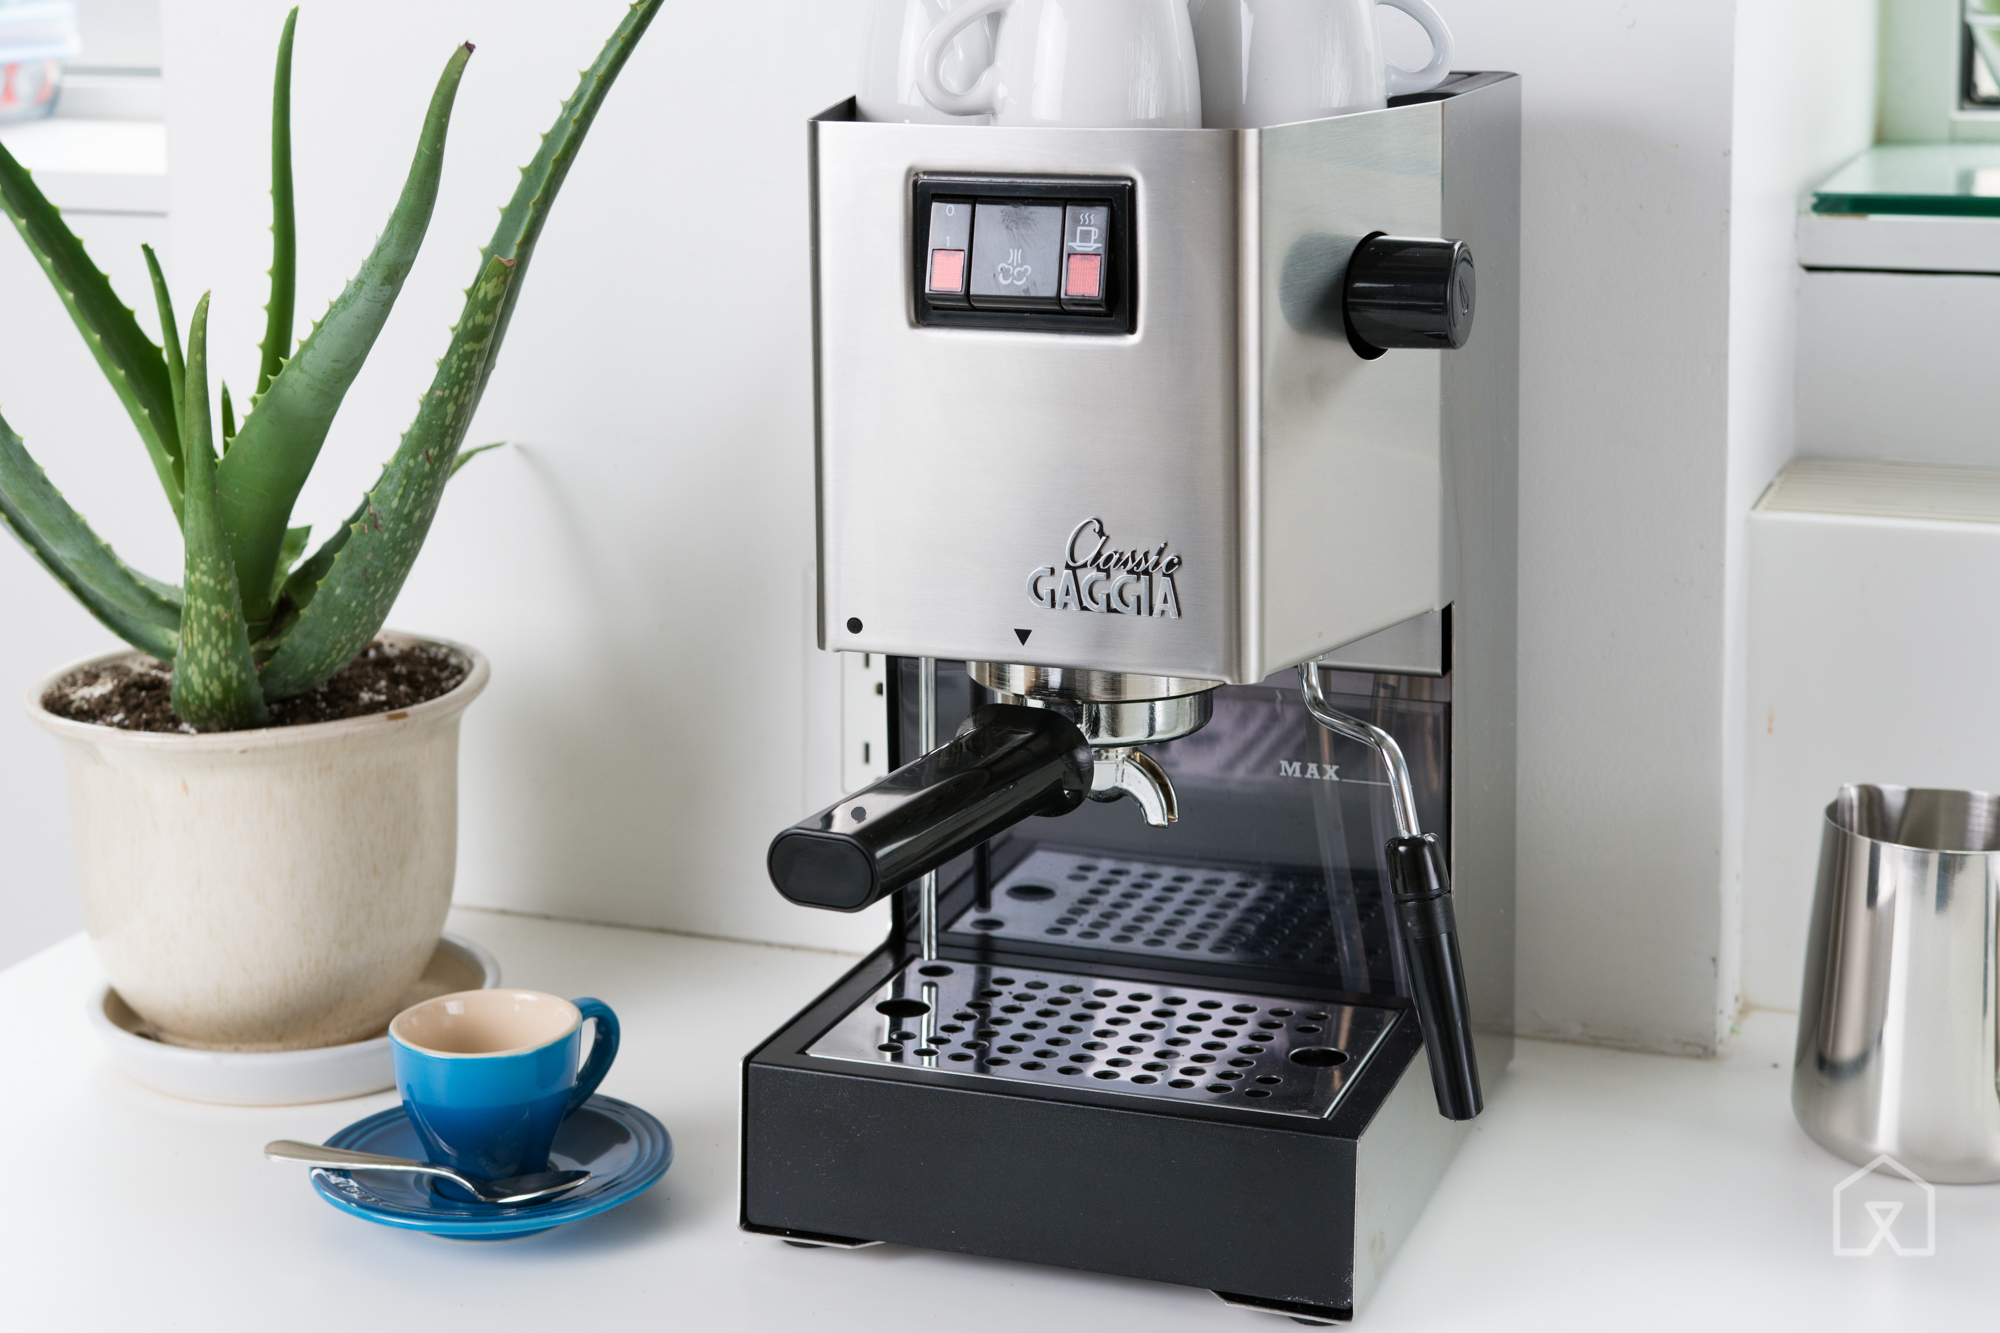 The best espresso machine, grinder and accessories for beginners